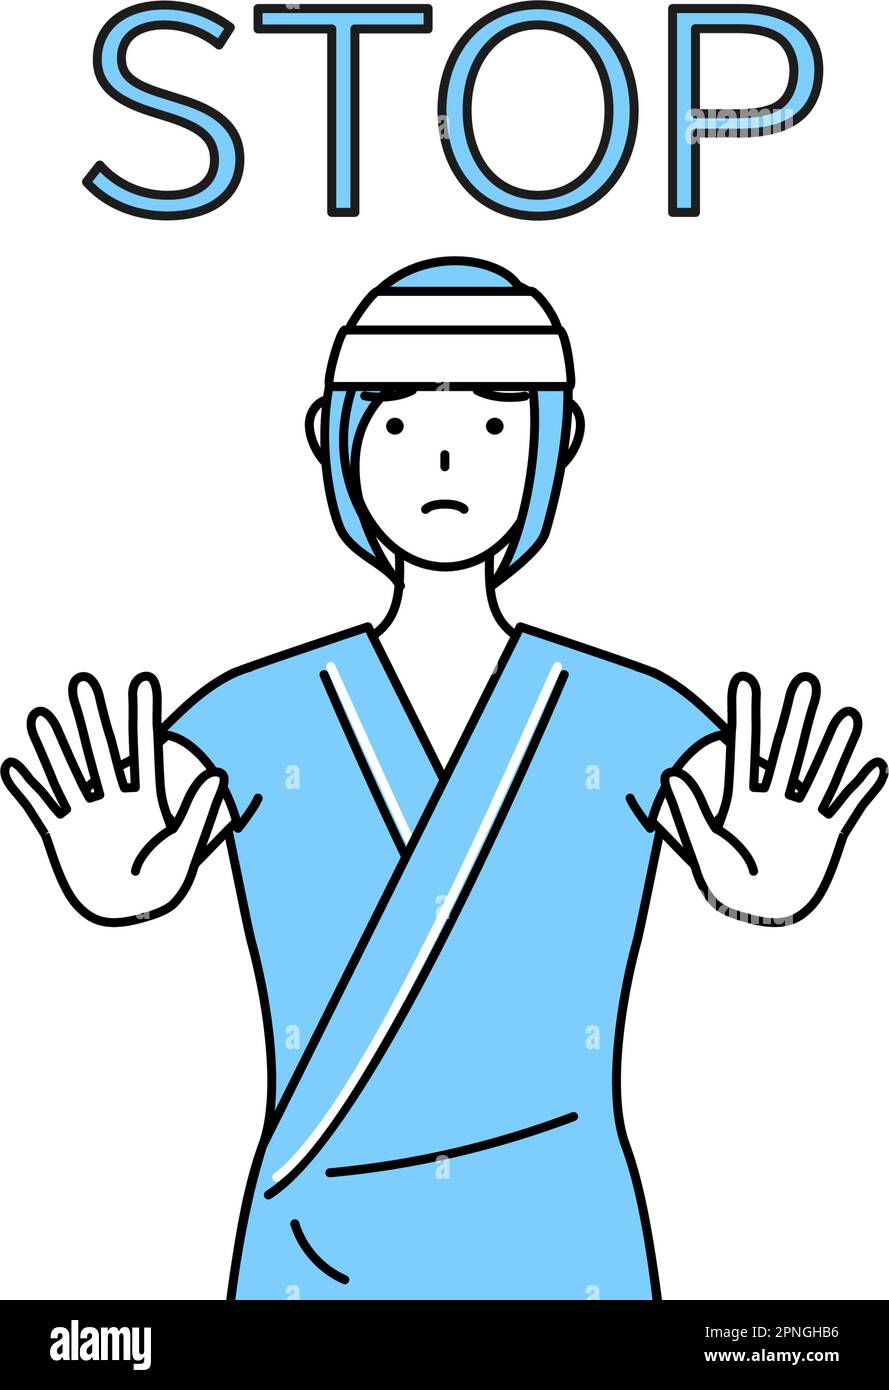 Female inpatient wearing hospital gown and bandage on head with her hands out in front of her body, signaling a stop, Vector Illustration Stock Vector